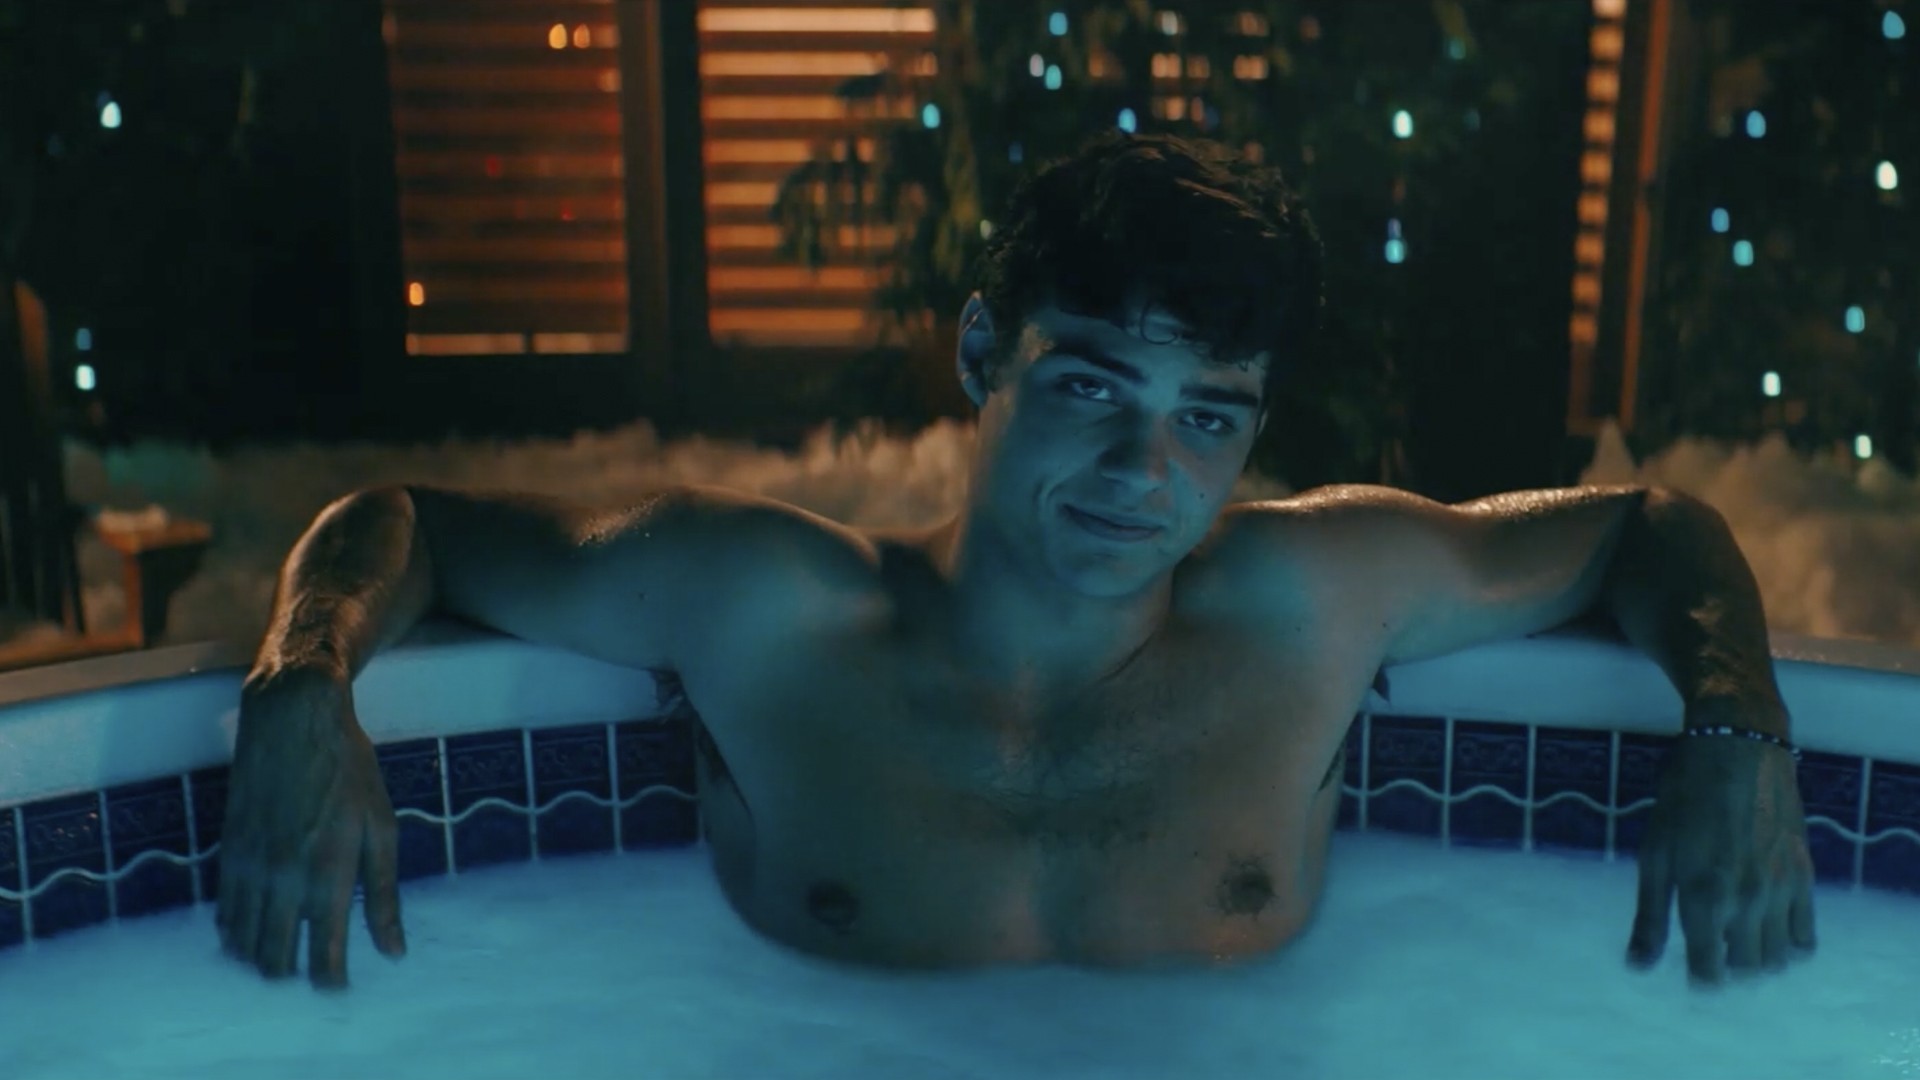 Five Glorious, Uninterrupted Hours Of Peter Kavinsky Shirtless In A Hot Tub.